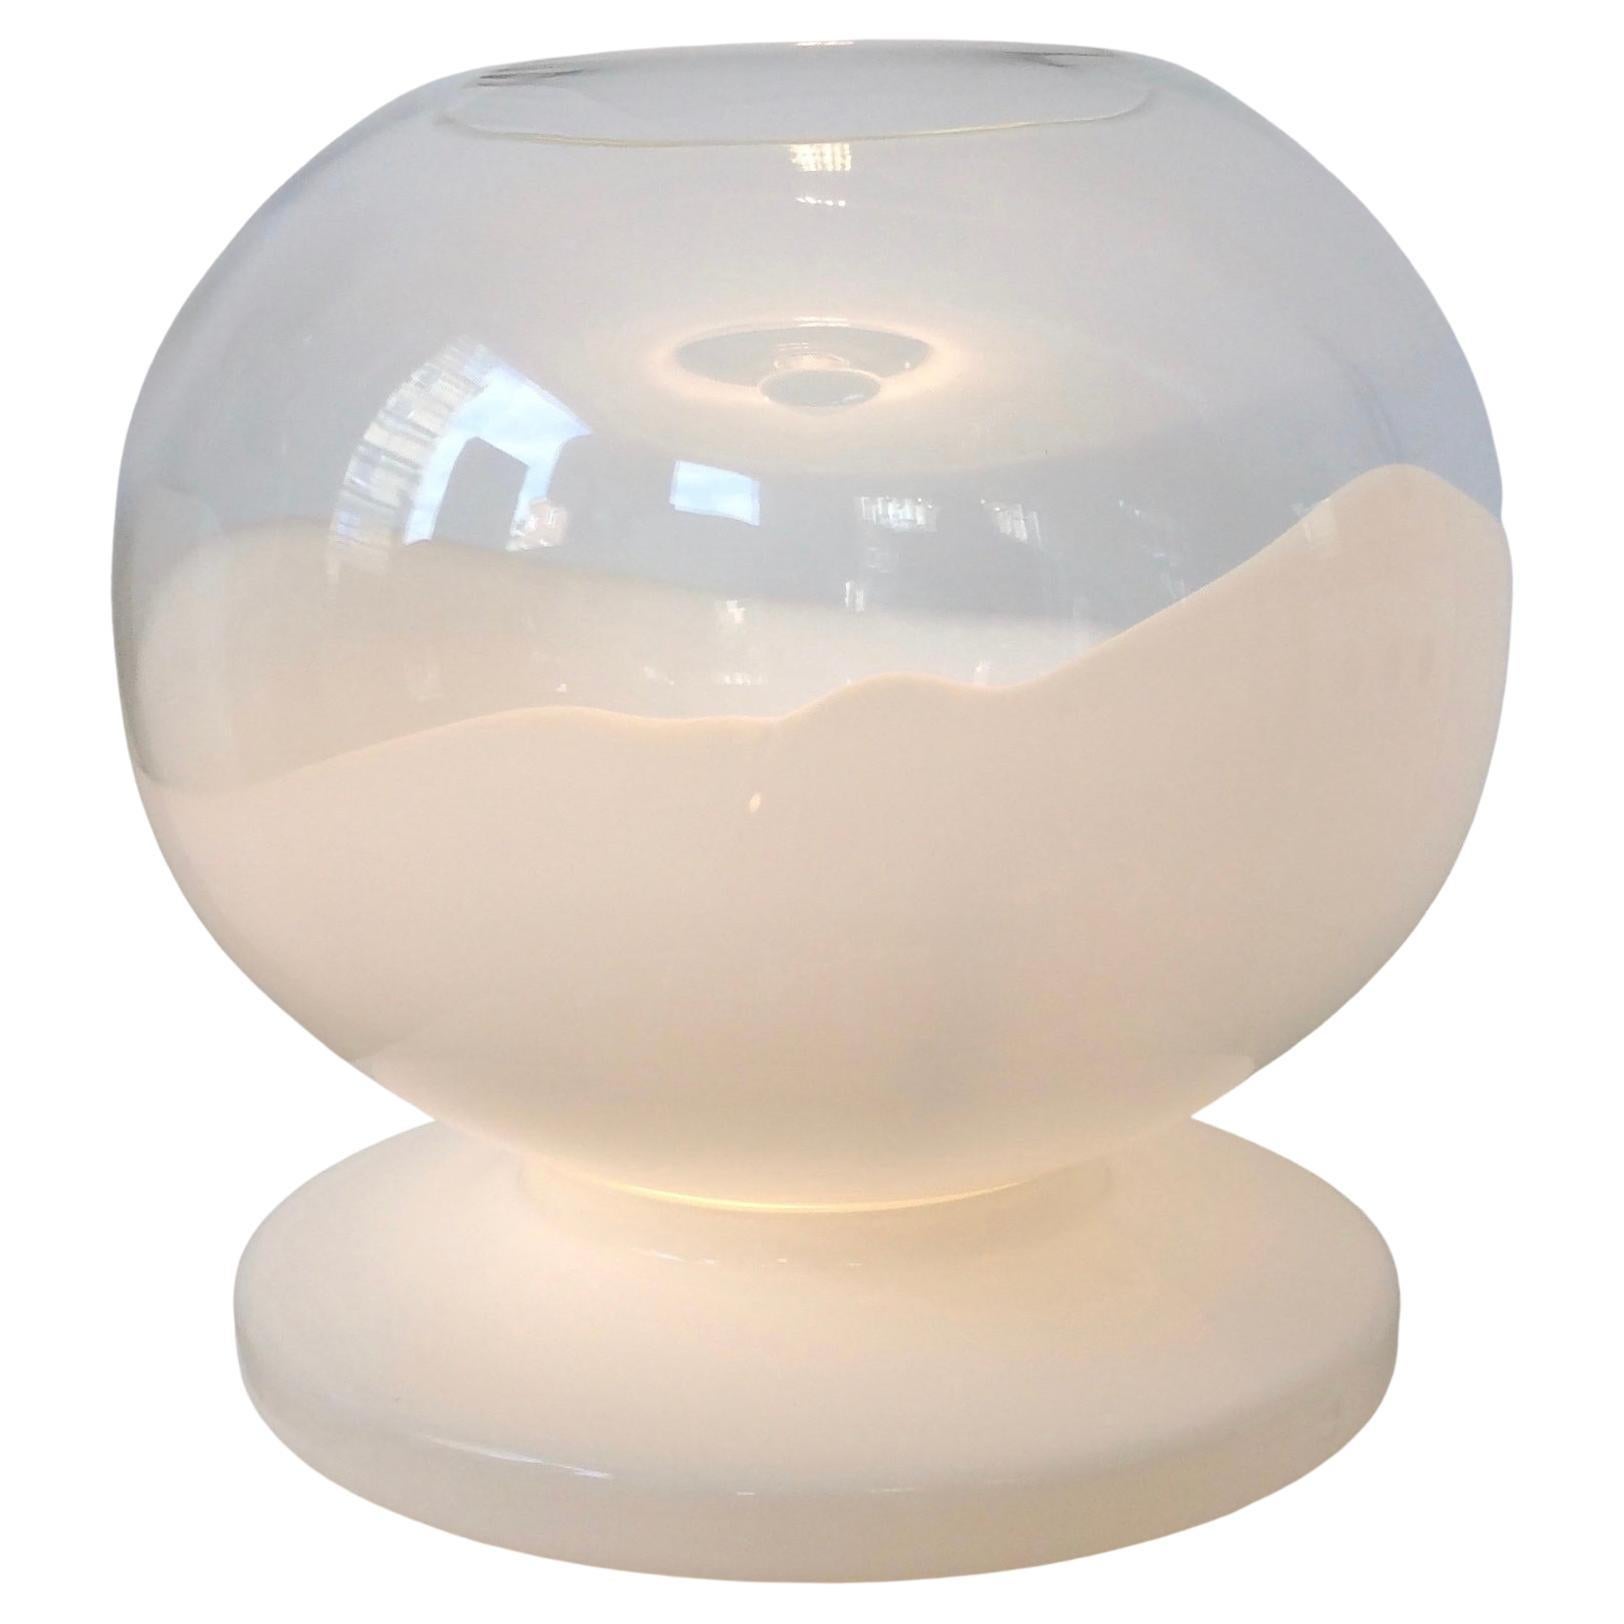 Large table lamp for Mazzega,circa 1970, Italy.
White and clear Murano glass.
Rewired, for EU and USA use.
One E27 bulb 
Dimensions: 46 cm diameter, 46 cm H.
Good original condition.
All purchases are covered by our Buyer Protection Guarantee.
This